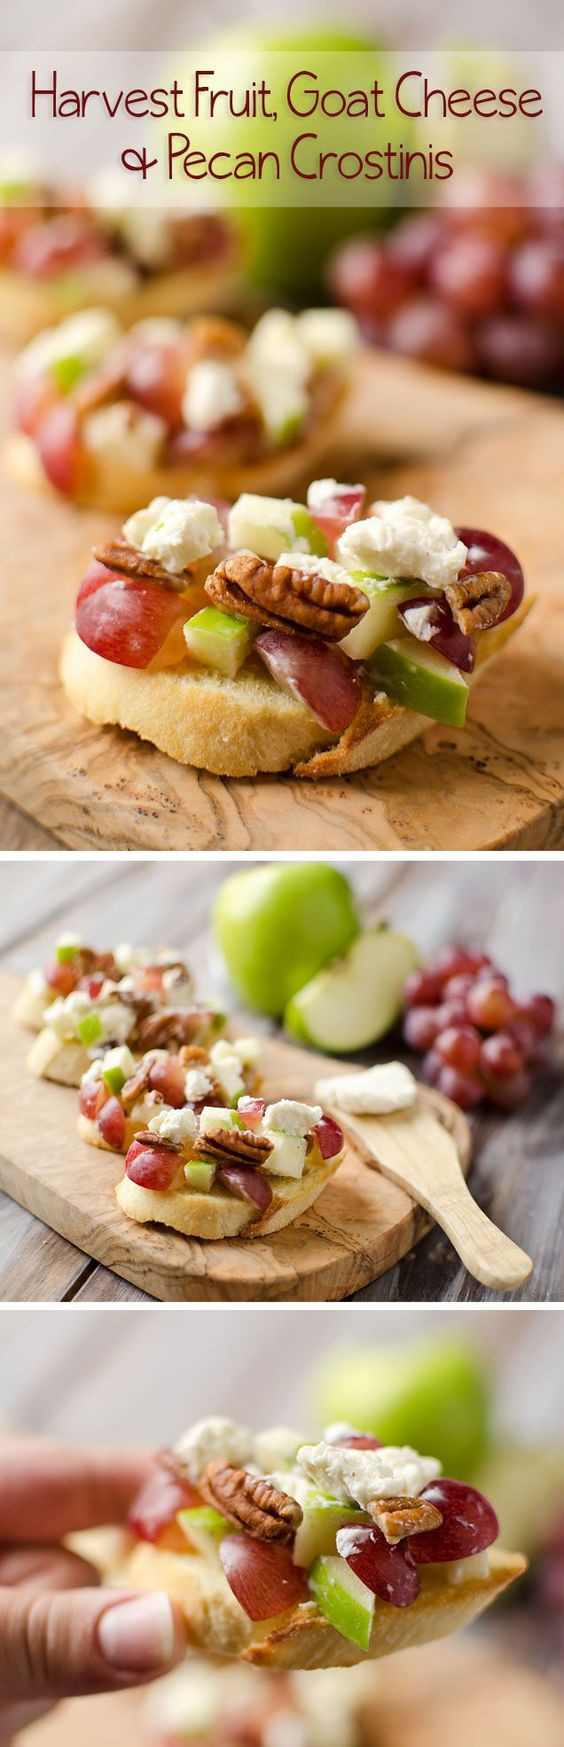 Appetizers For Thanksgiving Dinner
 The top 30 Ideas About Appetizers for Thanksgiving Dinner